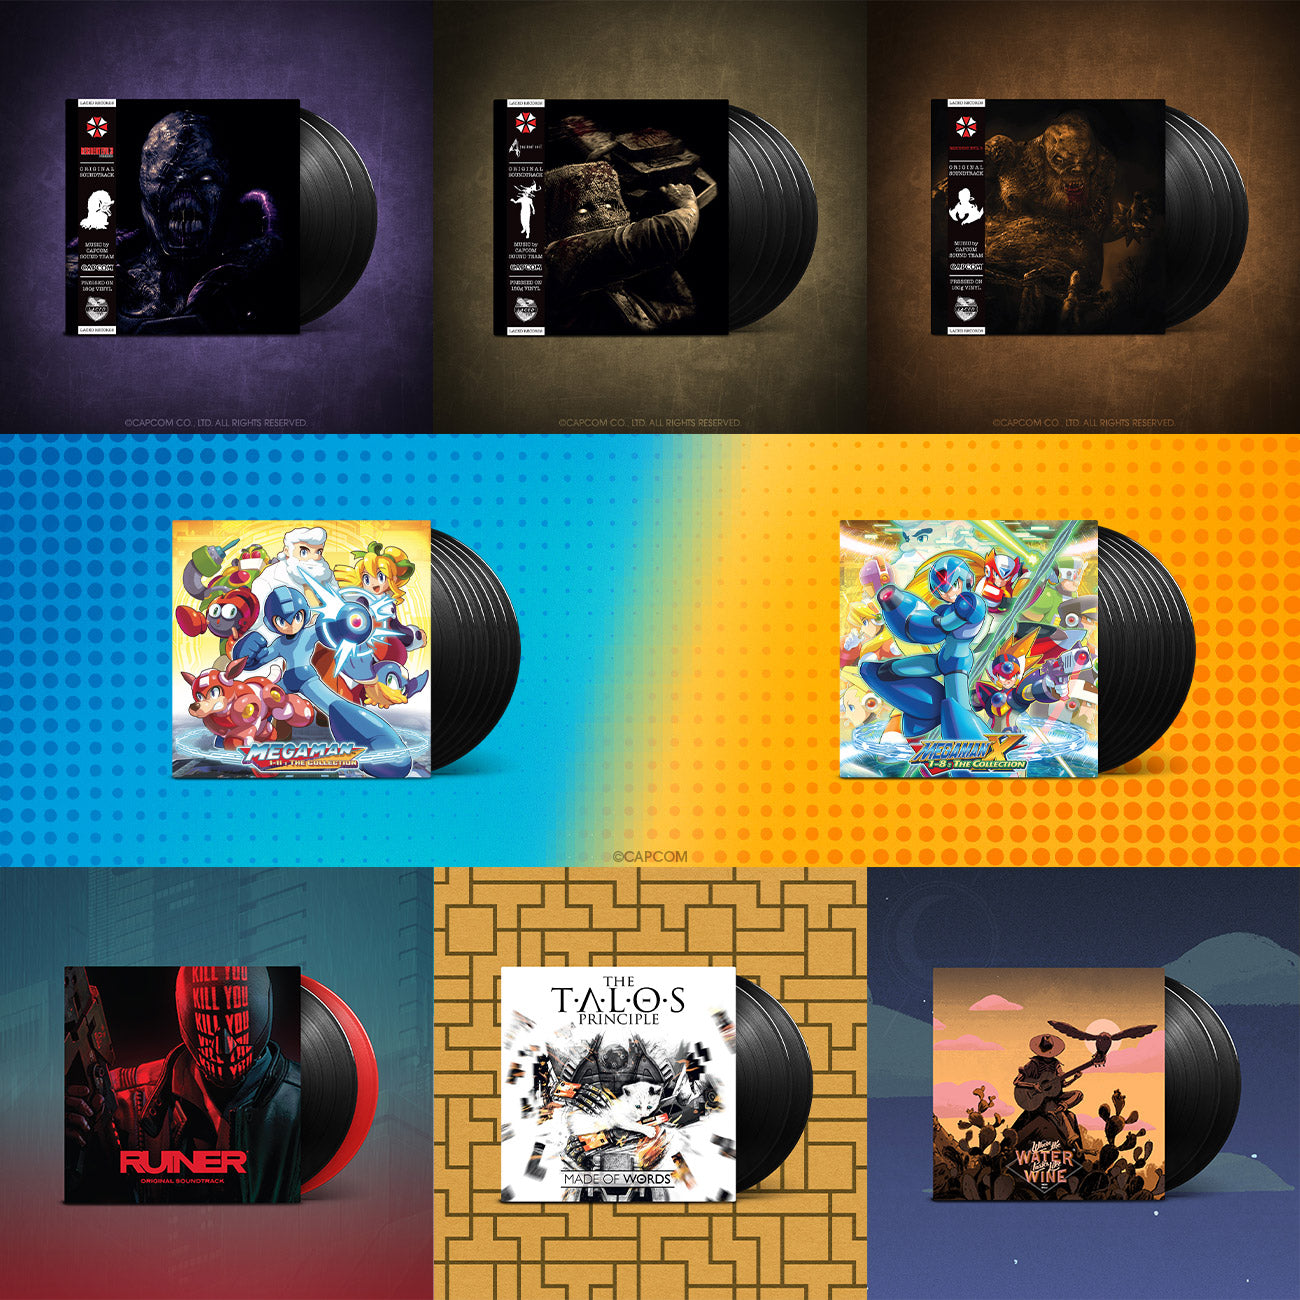 Various represses from Laced Records including Resident Evil, Mega Man, Ruiner, The Talos Principle and Where the Water Tastes Like Wine